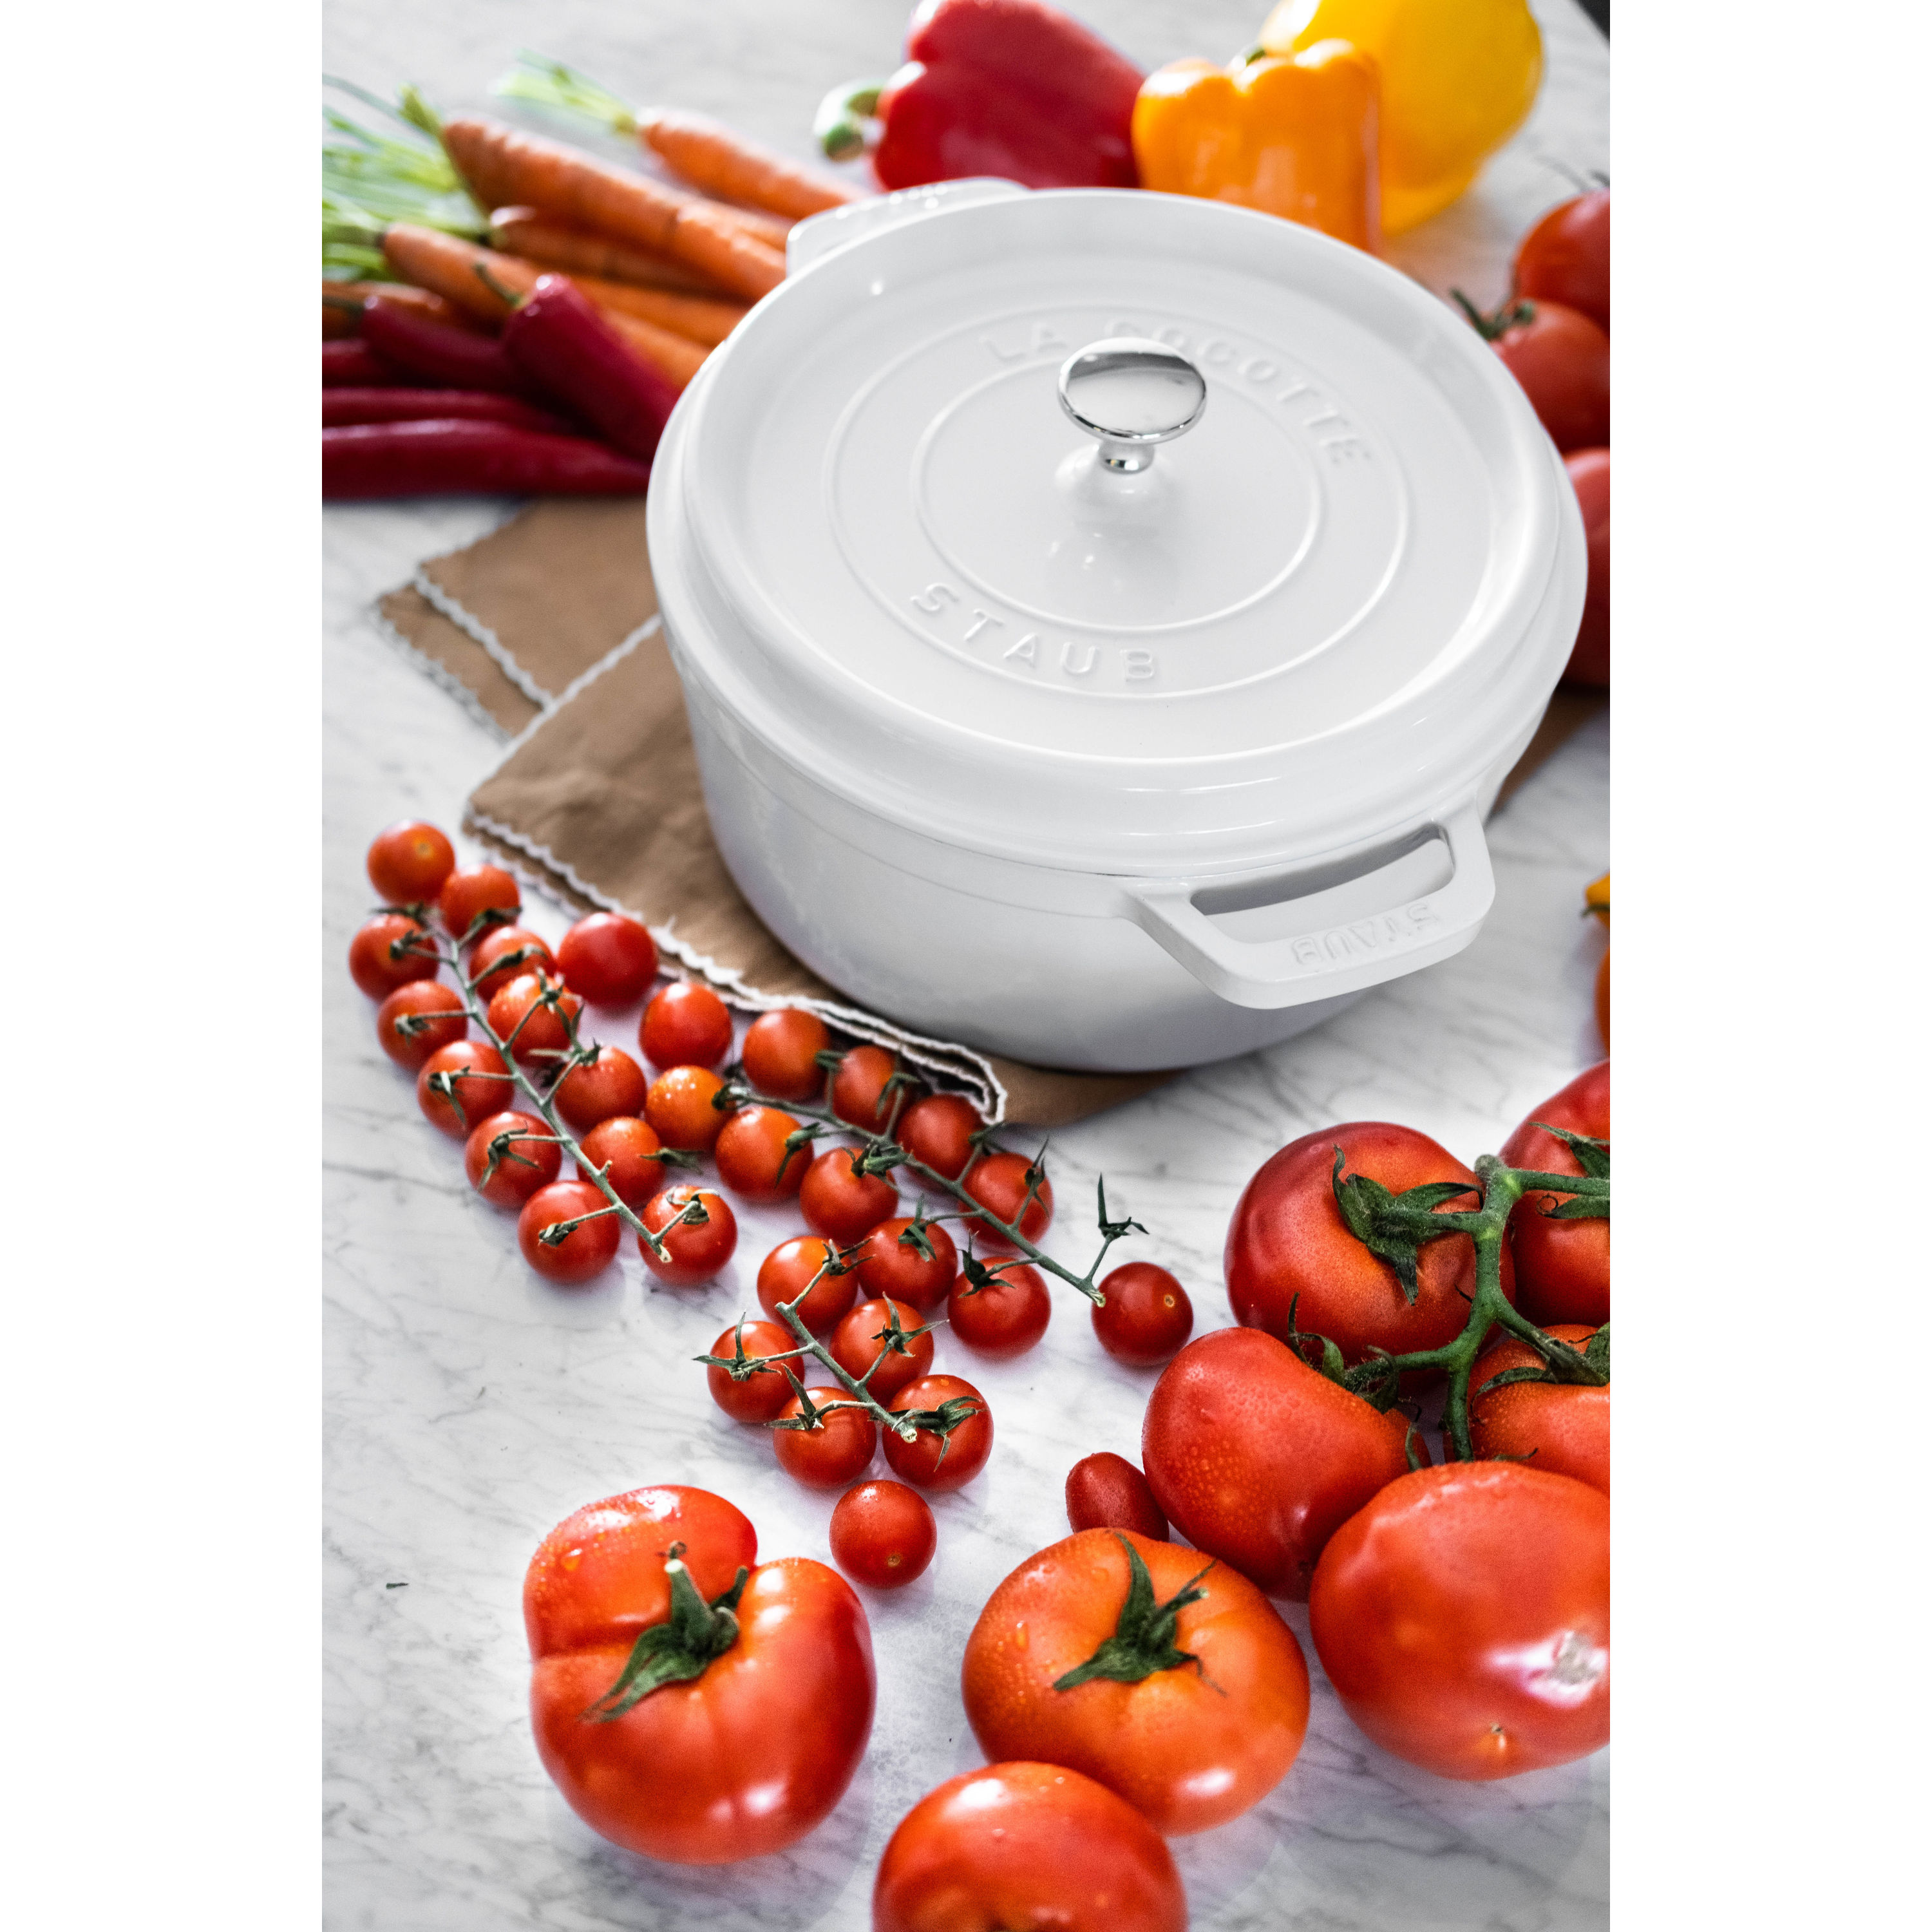 STAUB Cast Iron Dutch Oven 4-qt Round Cocotte, Made in France, Serves 3-4,  White